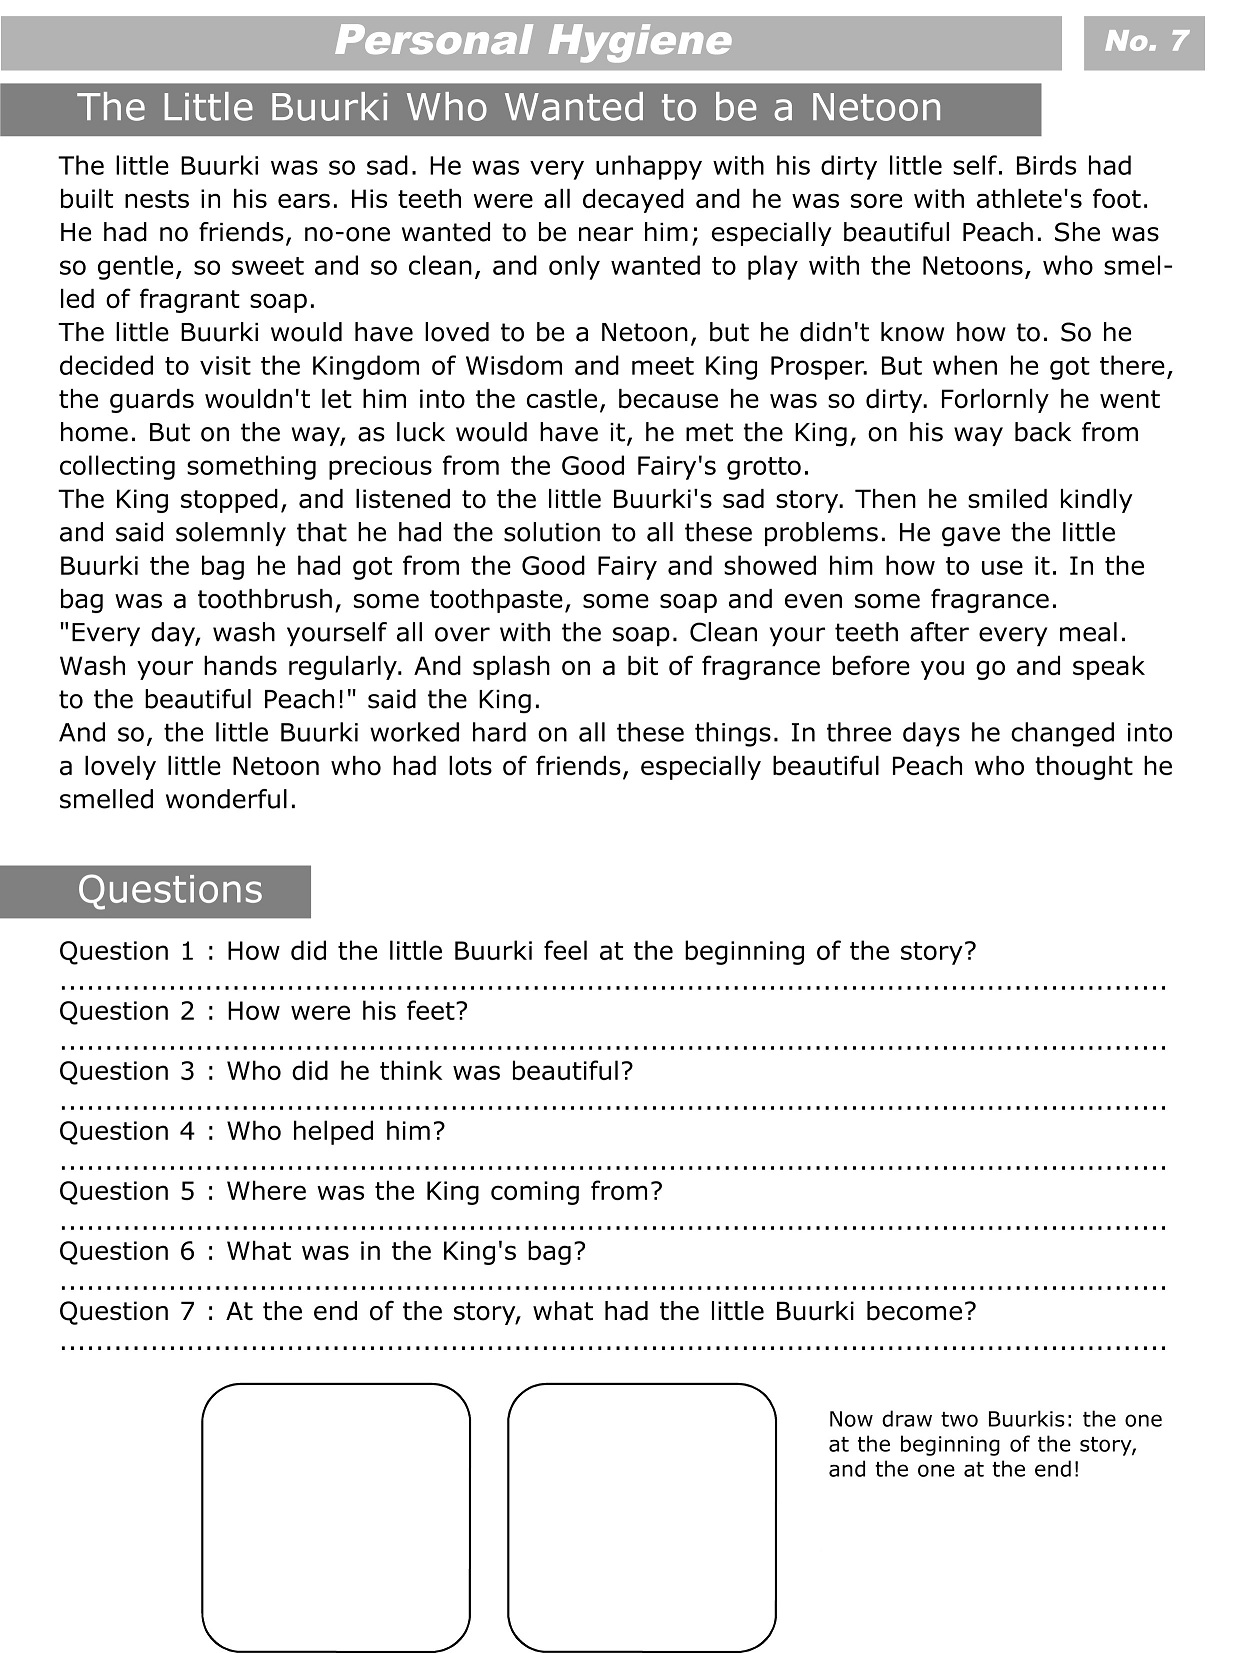 16-best-images-of-printable-hygiene-worksheets-for-adults-personal